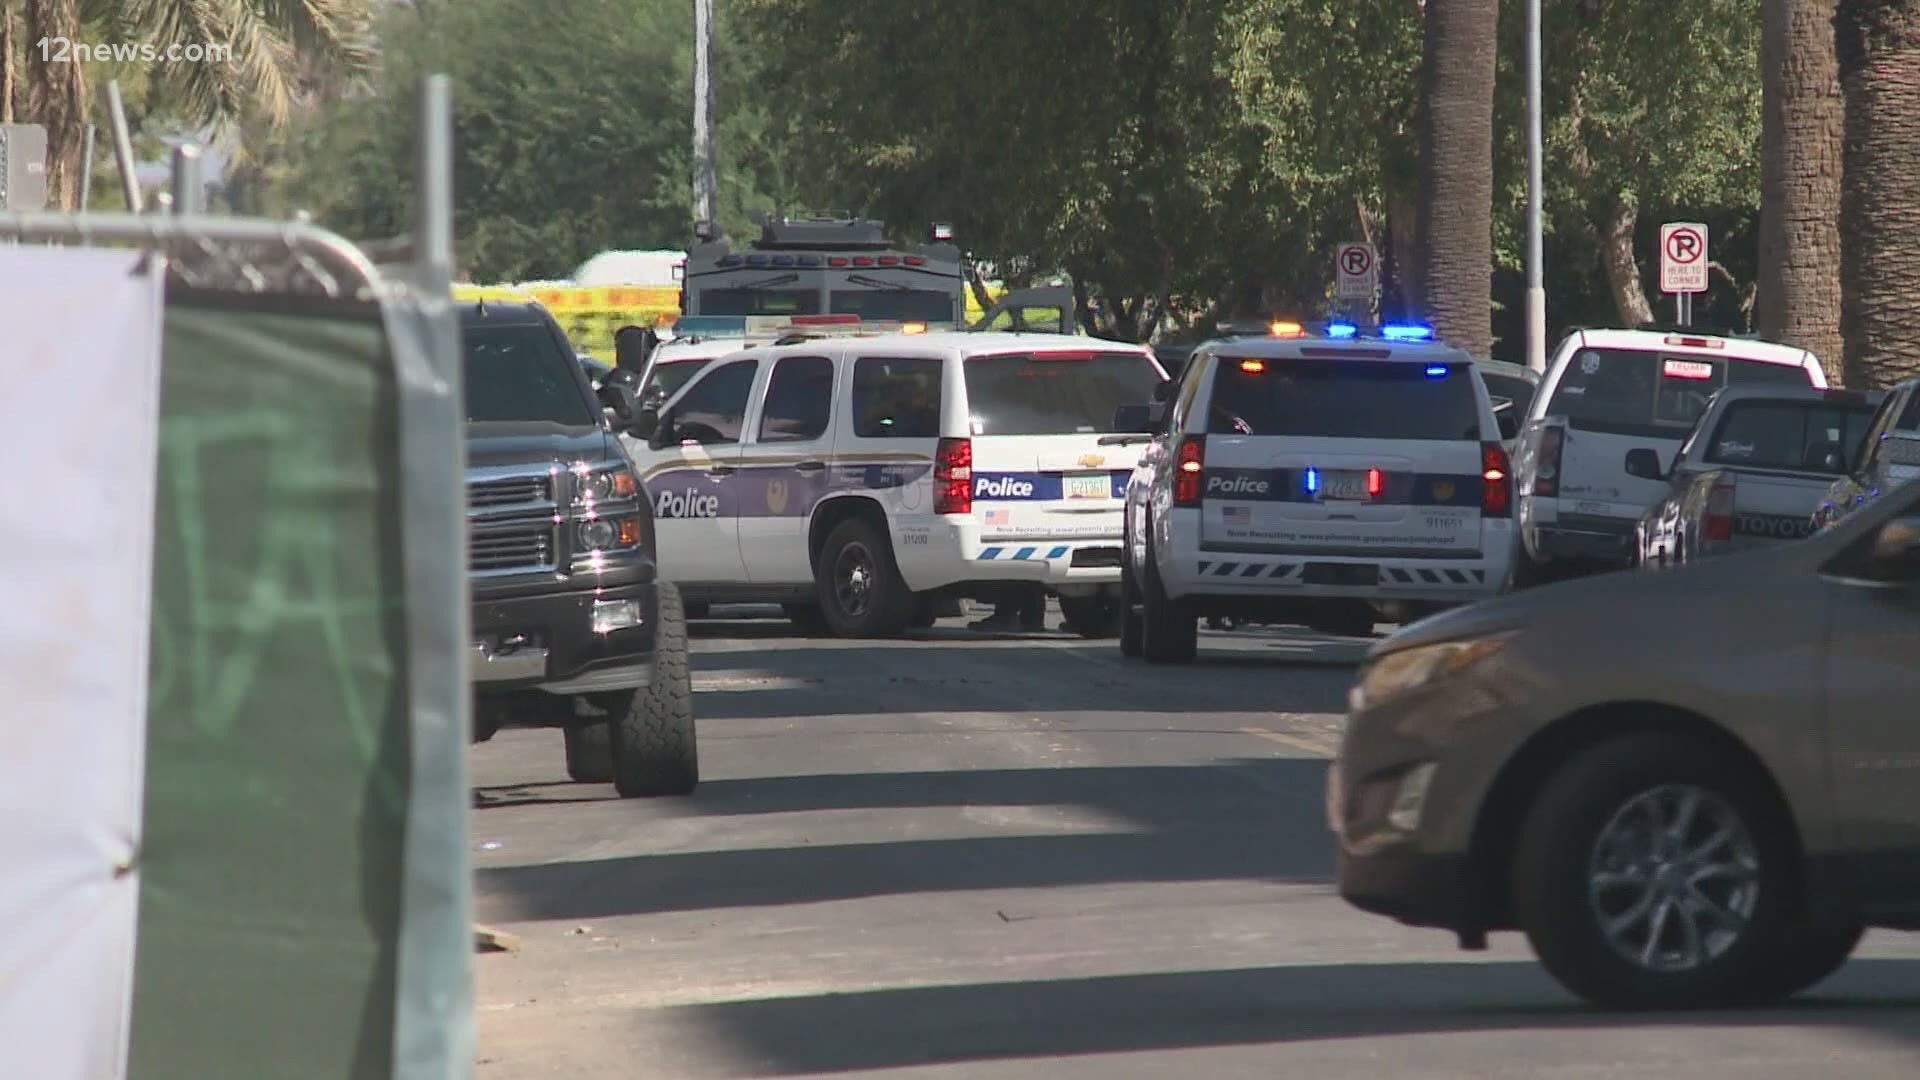 Police say the man and woman were seen fleeing from the scene of the shooting and ran into a downtown Phoenix apartment building.